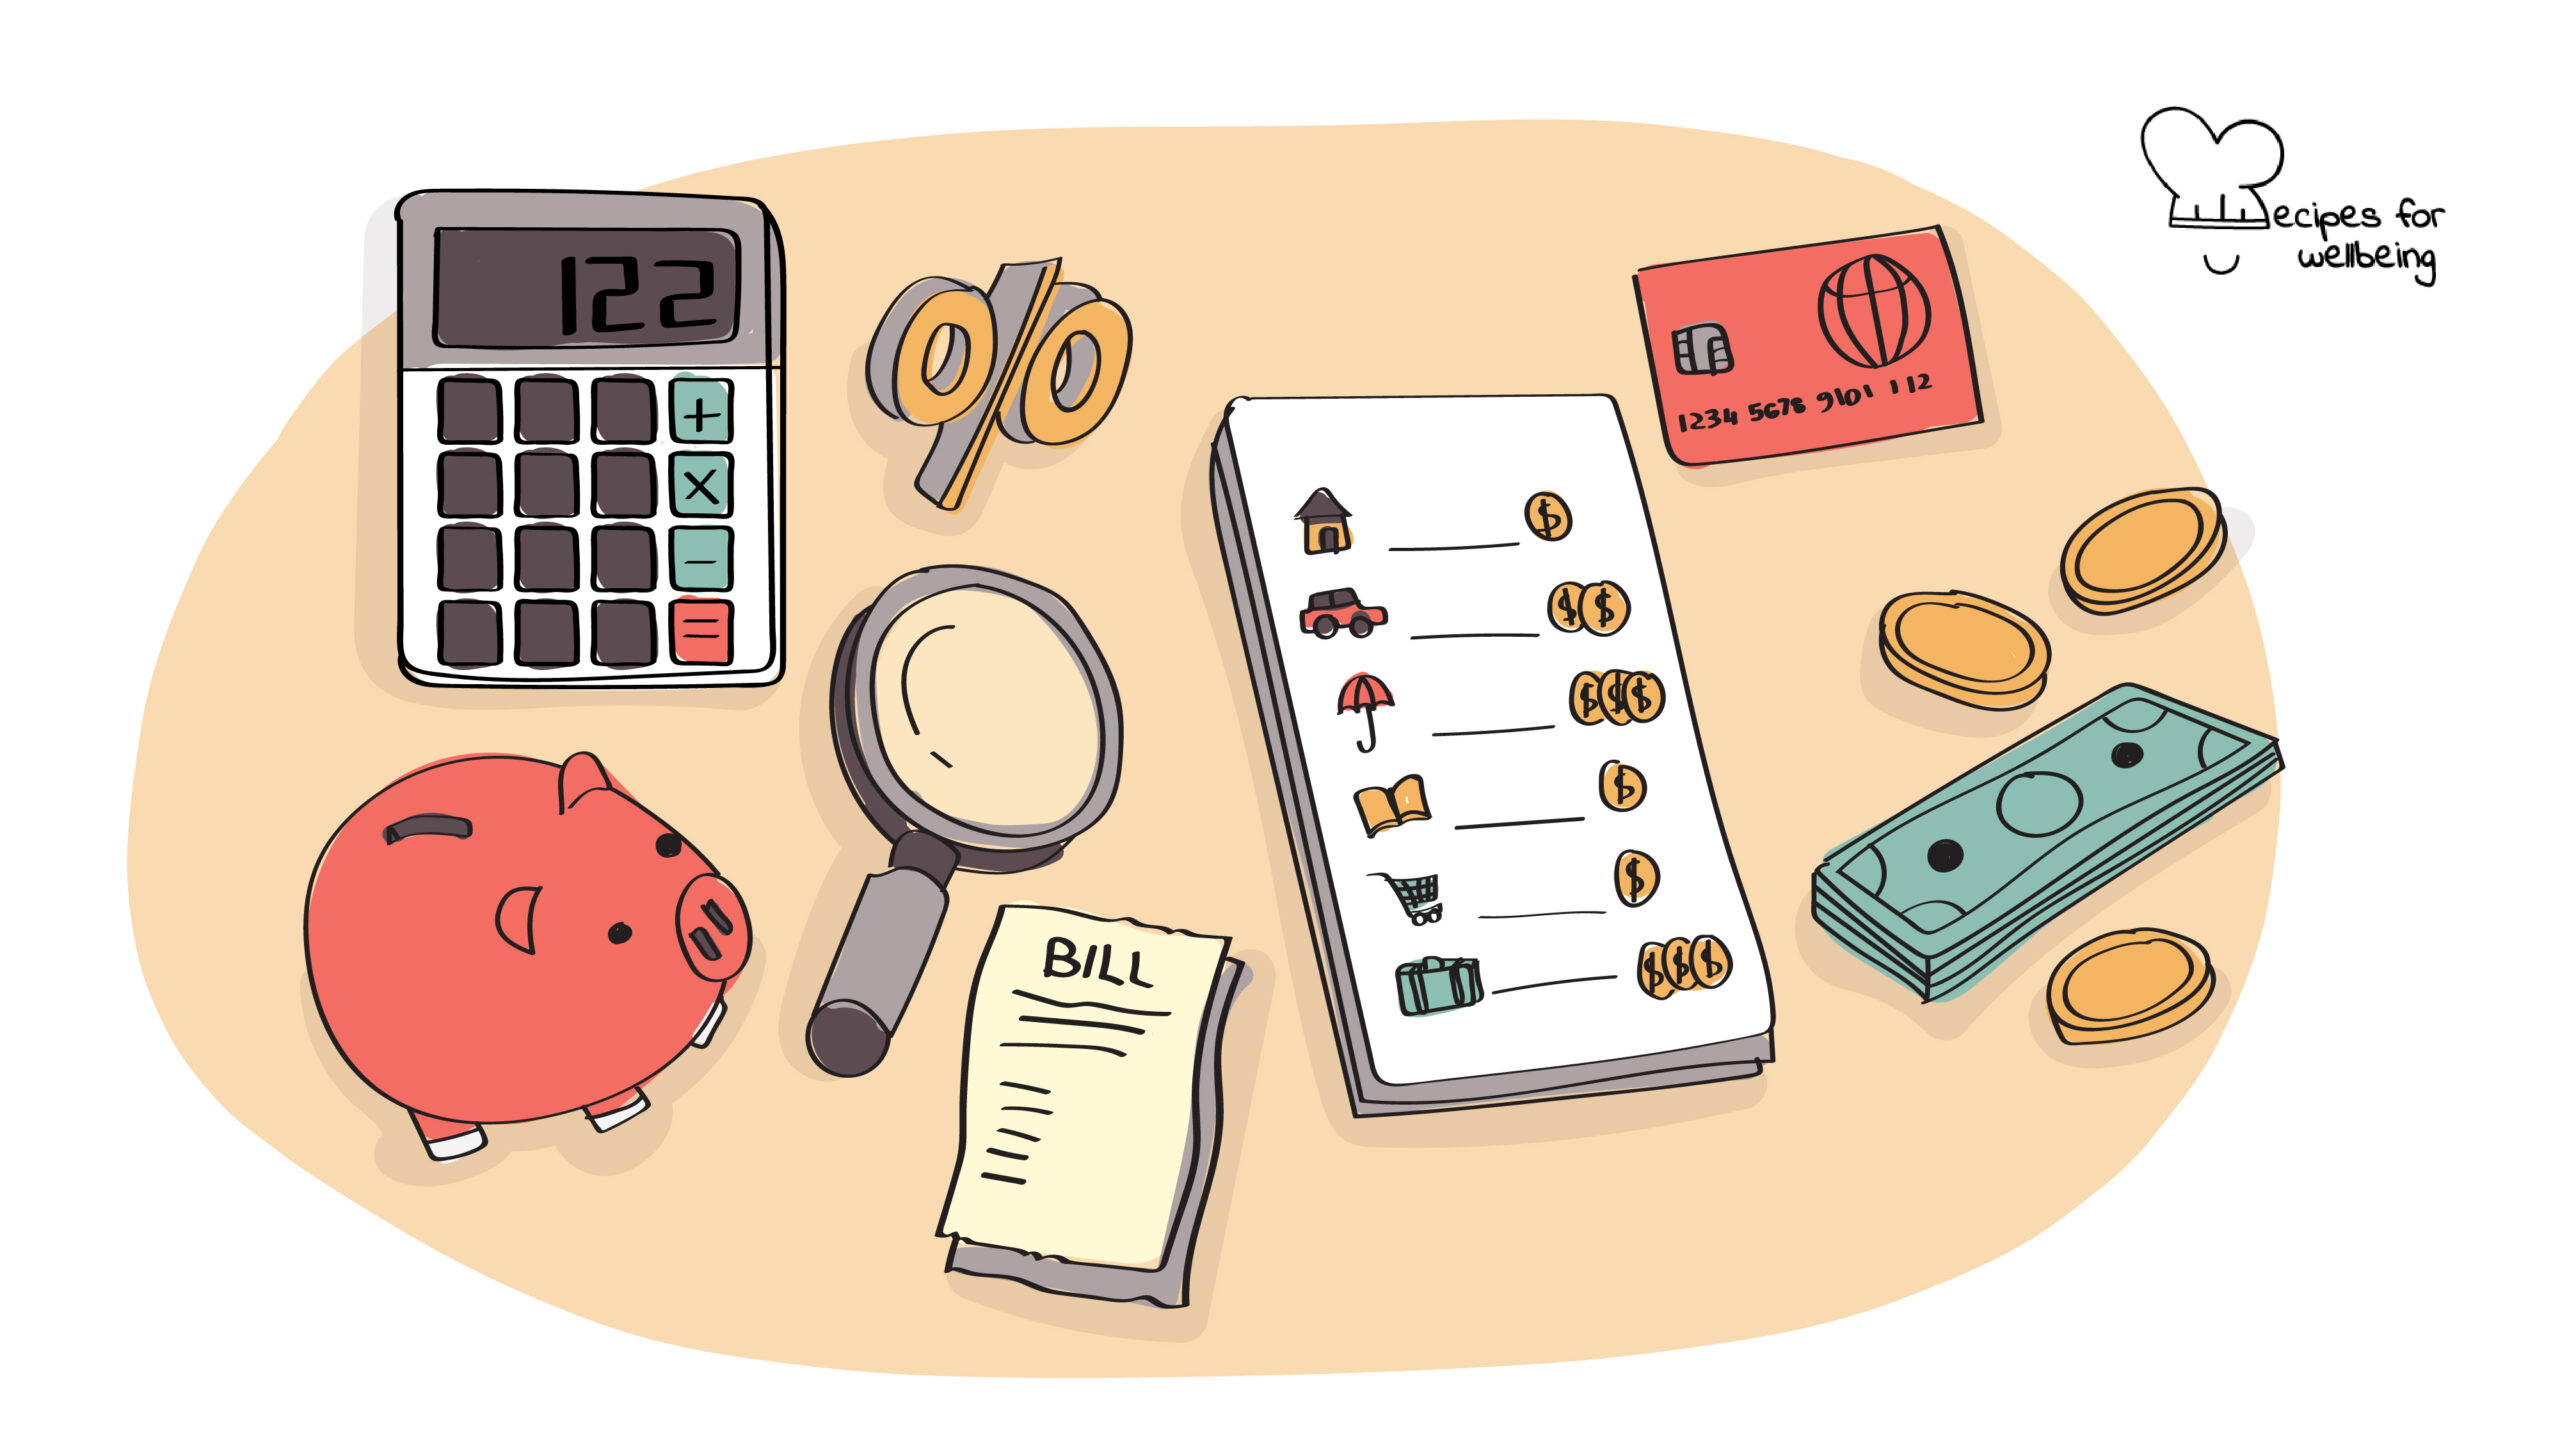 Illustration of a few objected related to finances, e.g. a bill, a calculator, banknotes and coins, a credit/debit card, the percentage symbl, a magnifying glass, a piggy bank, and a notebook with a list of expenses. © Recipes for Wellbeing